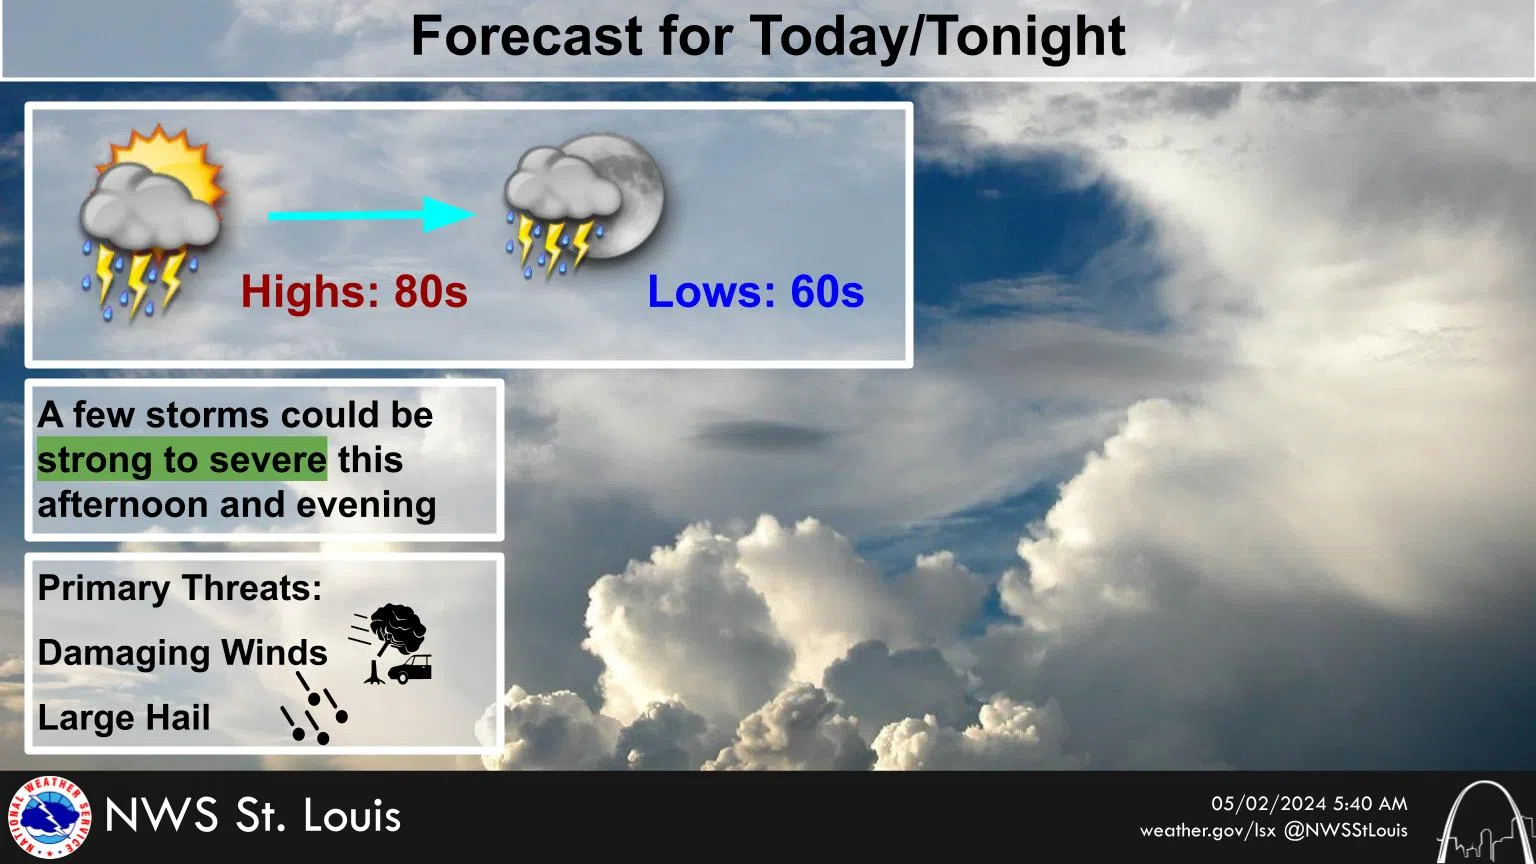 Mostly Sunny & Warm Today, Showers & Storms tonight